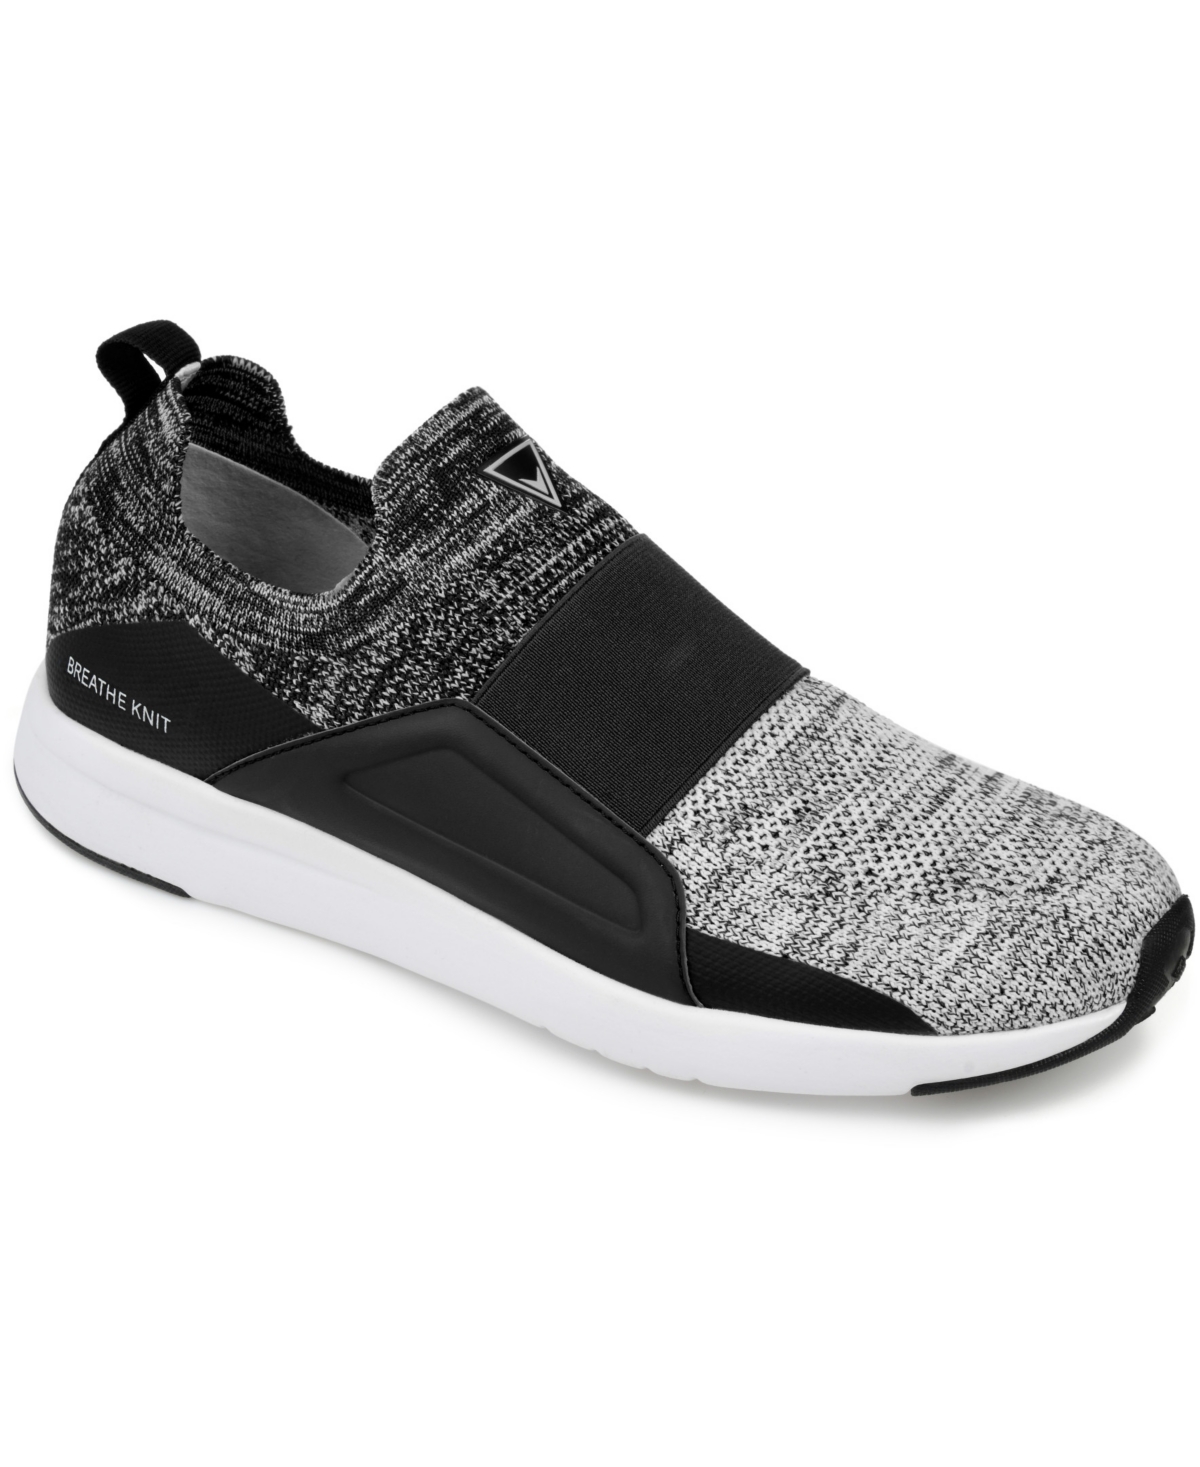 Men's Cannon Casual Slip-On Knit Walking Sneakers - Red